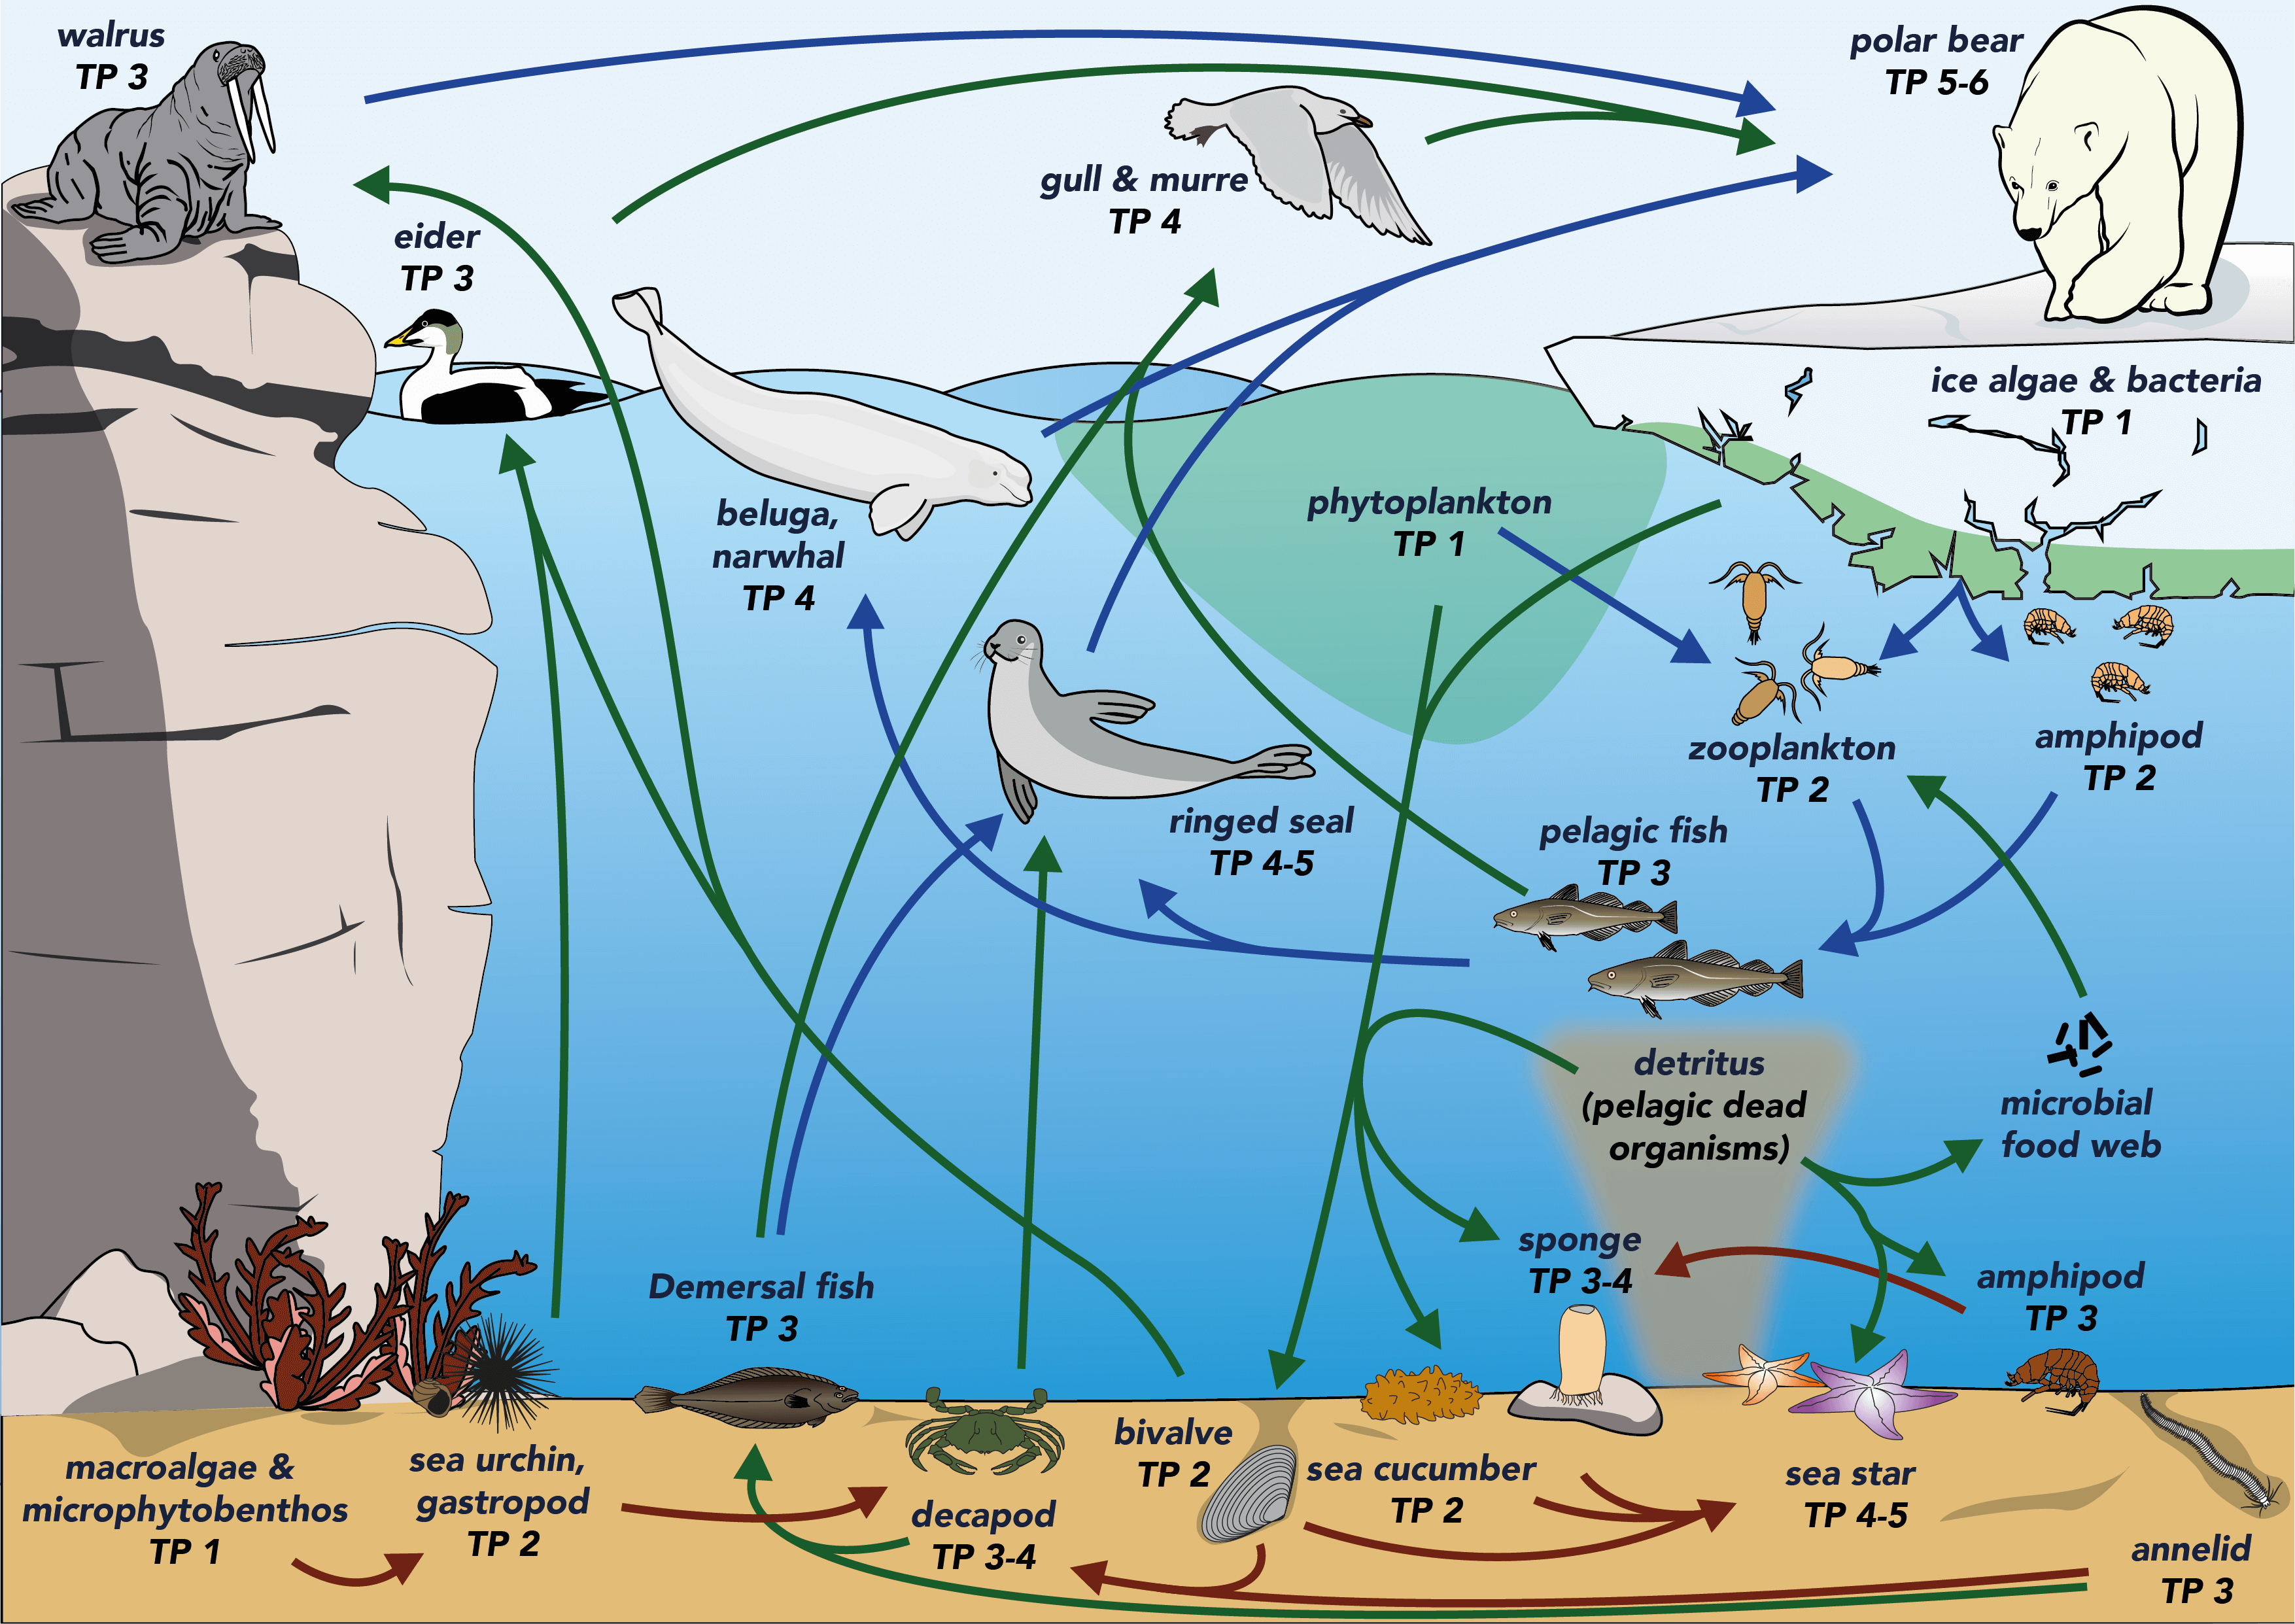 Diagram of Southampton marine food web with varying species and colored arrows to indicate their subweb interaction. Credit: Rémi Amiraux